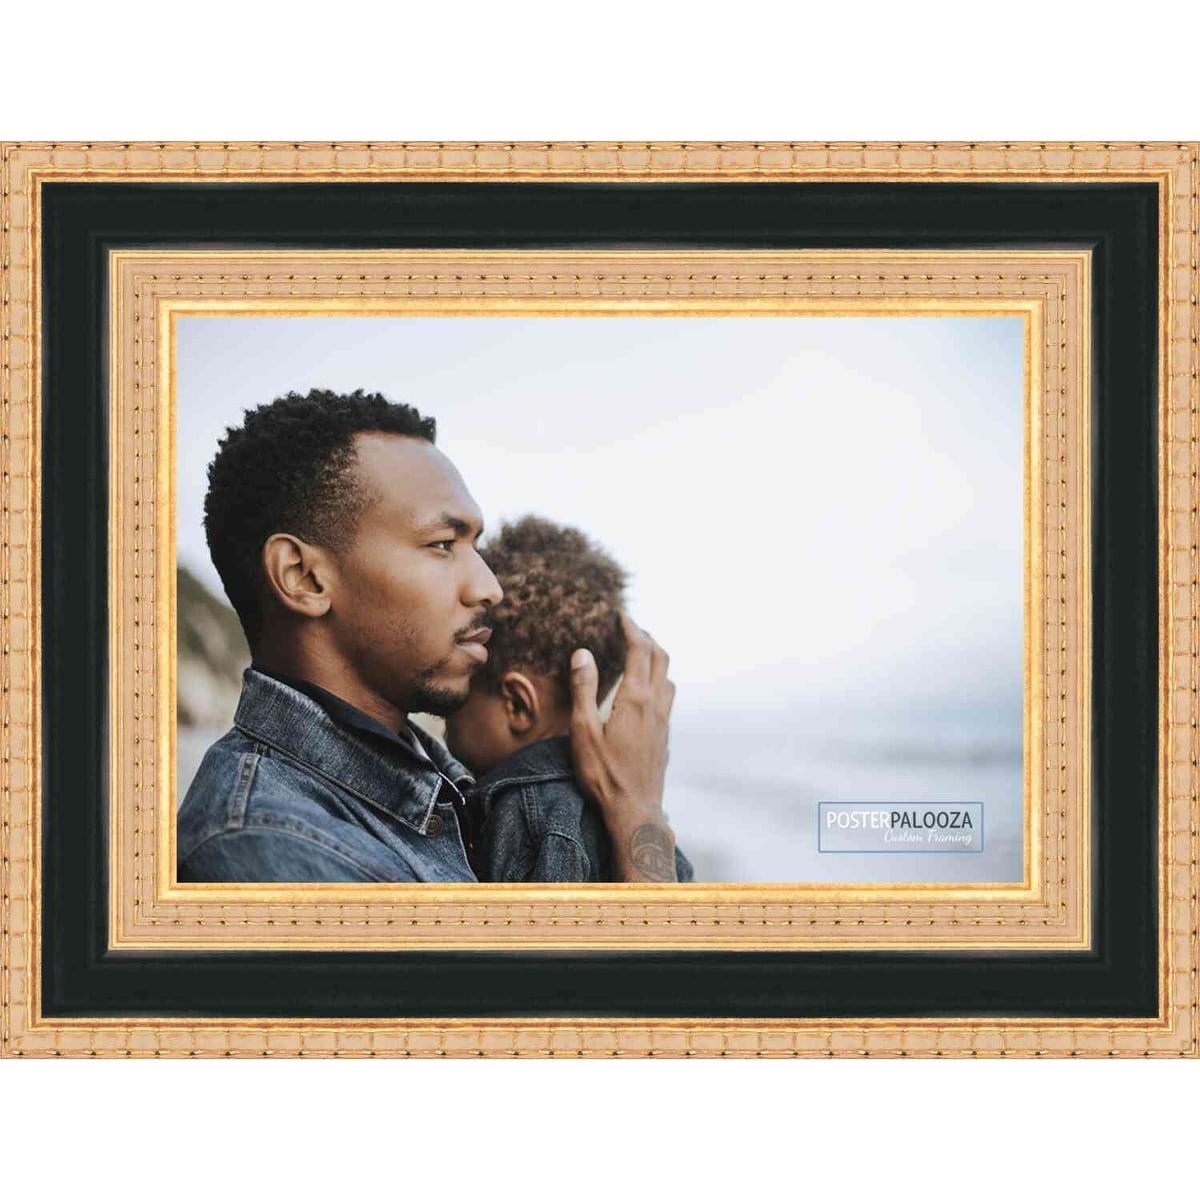 https://ak1.ostkcdn.com/images/products/is/images/direct/0df54ffbb35f6ba76d829a42fac800af8dc50f17/6x10-Traditional-Gold-Complete-Wood-Picture-Frame-with-UV-Acrylic%2C-Foam-Board-Backing%2C-%26-Hardware.jpg